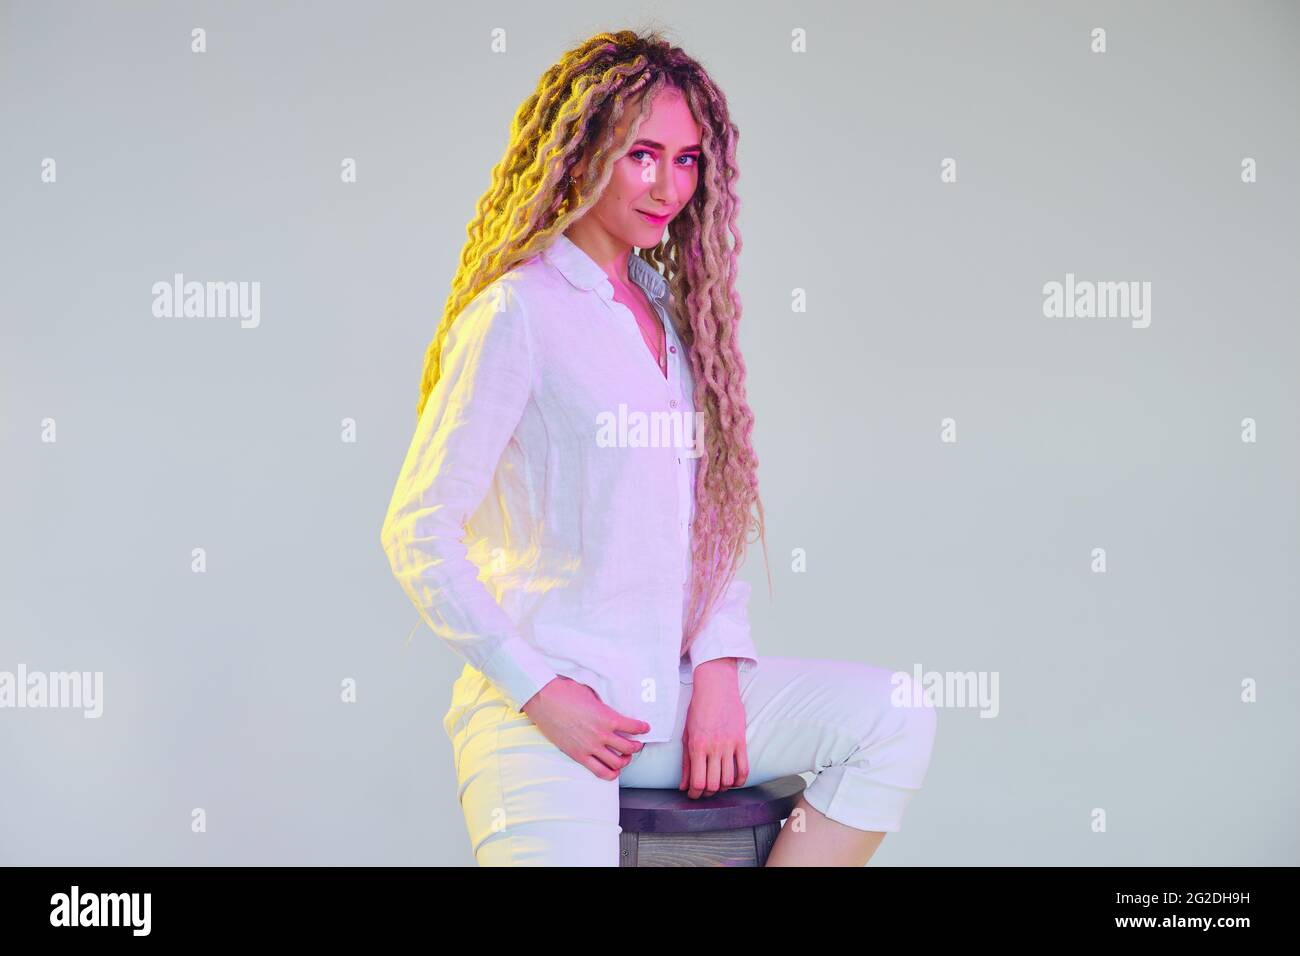 Tricky woman in white blouse and trousers under neon light Stock Photo